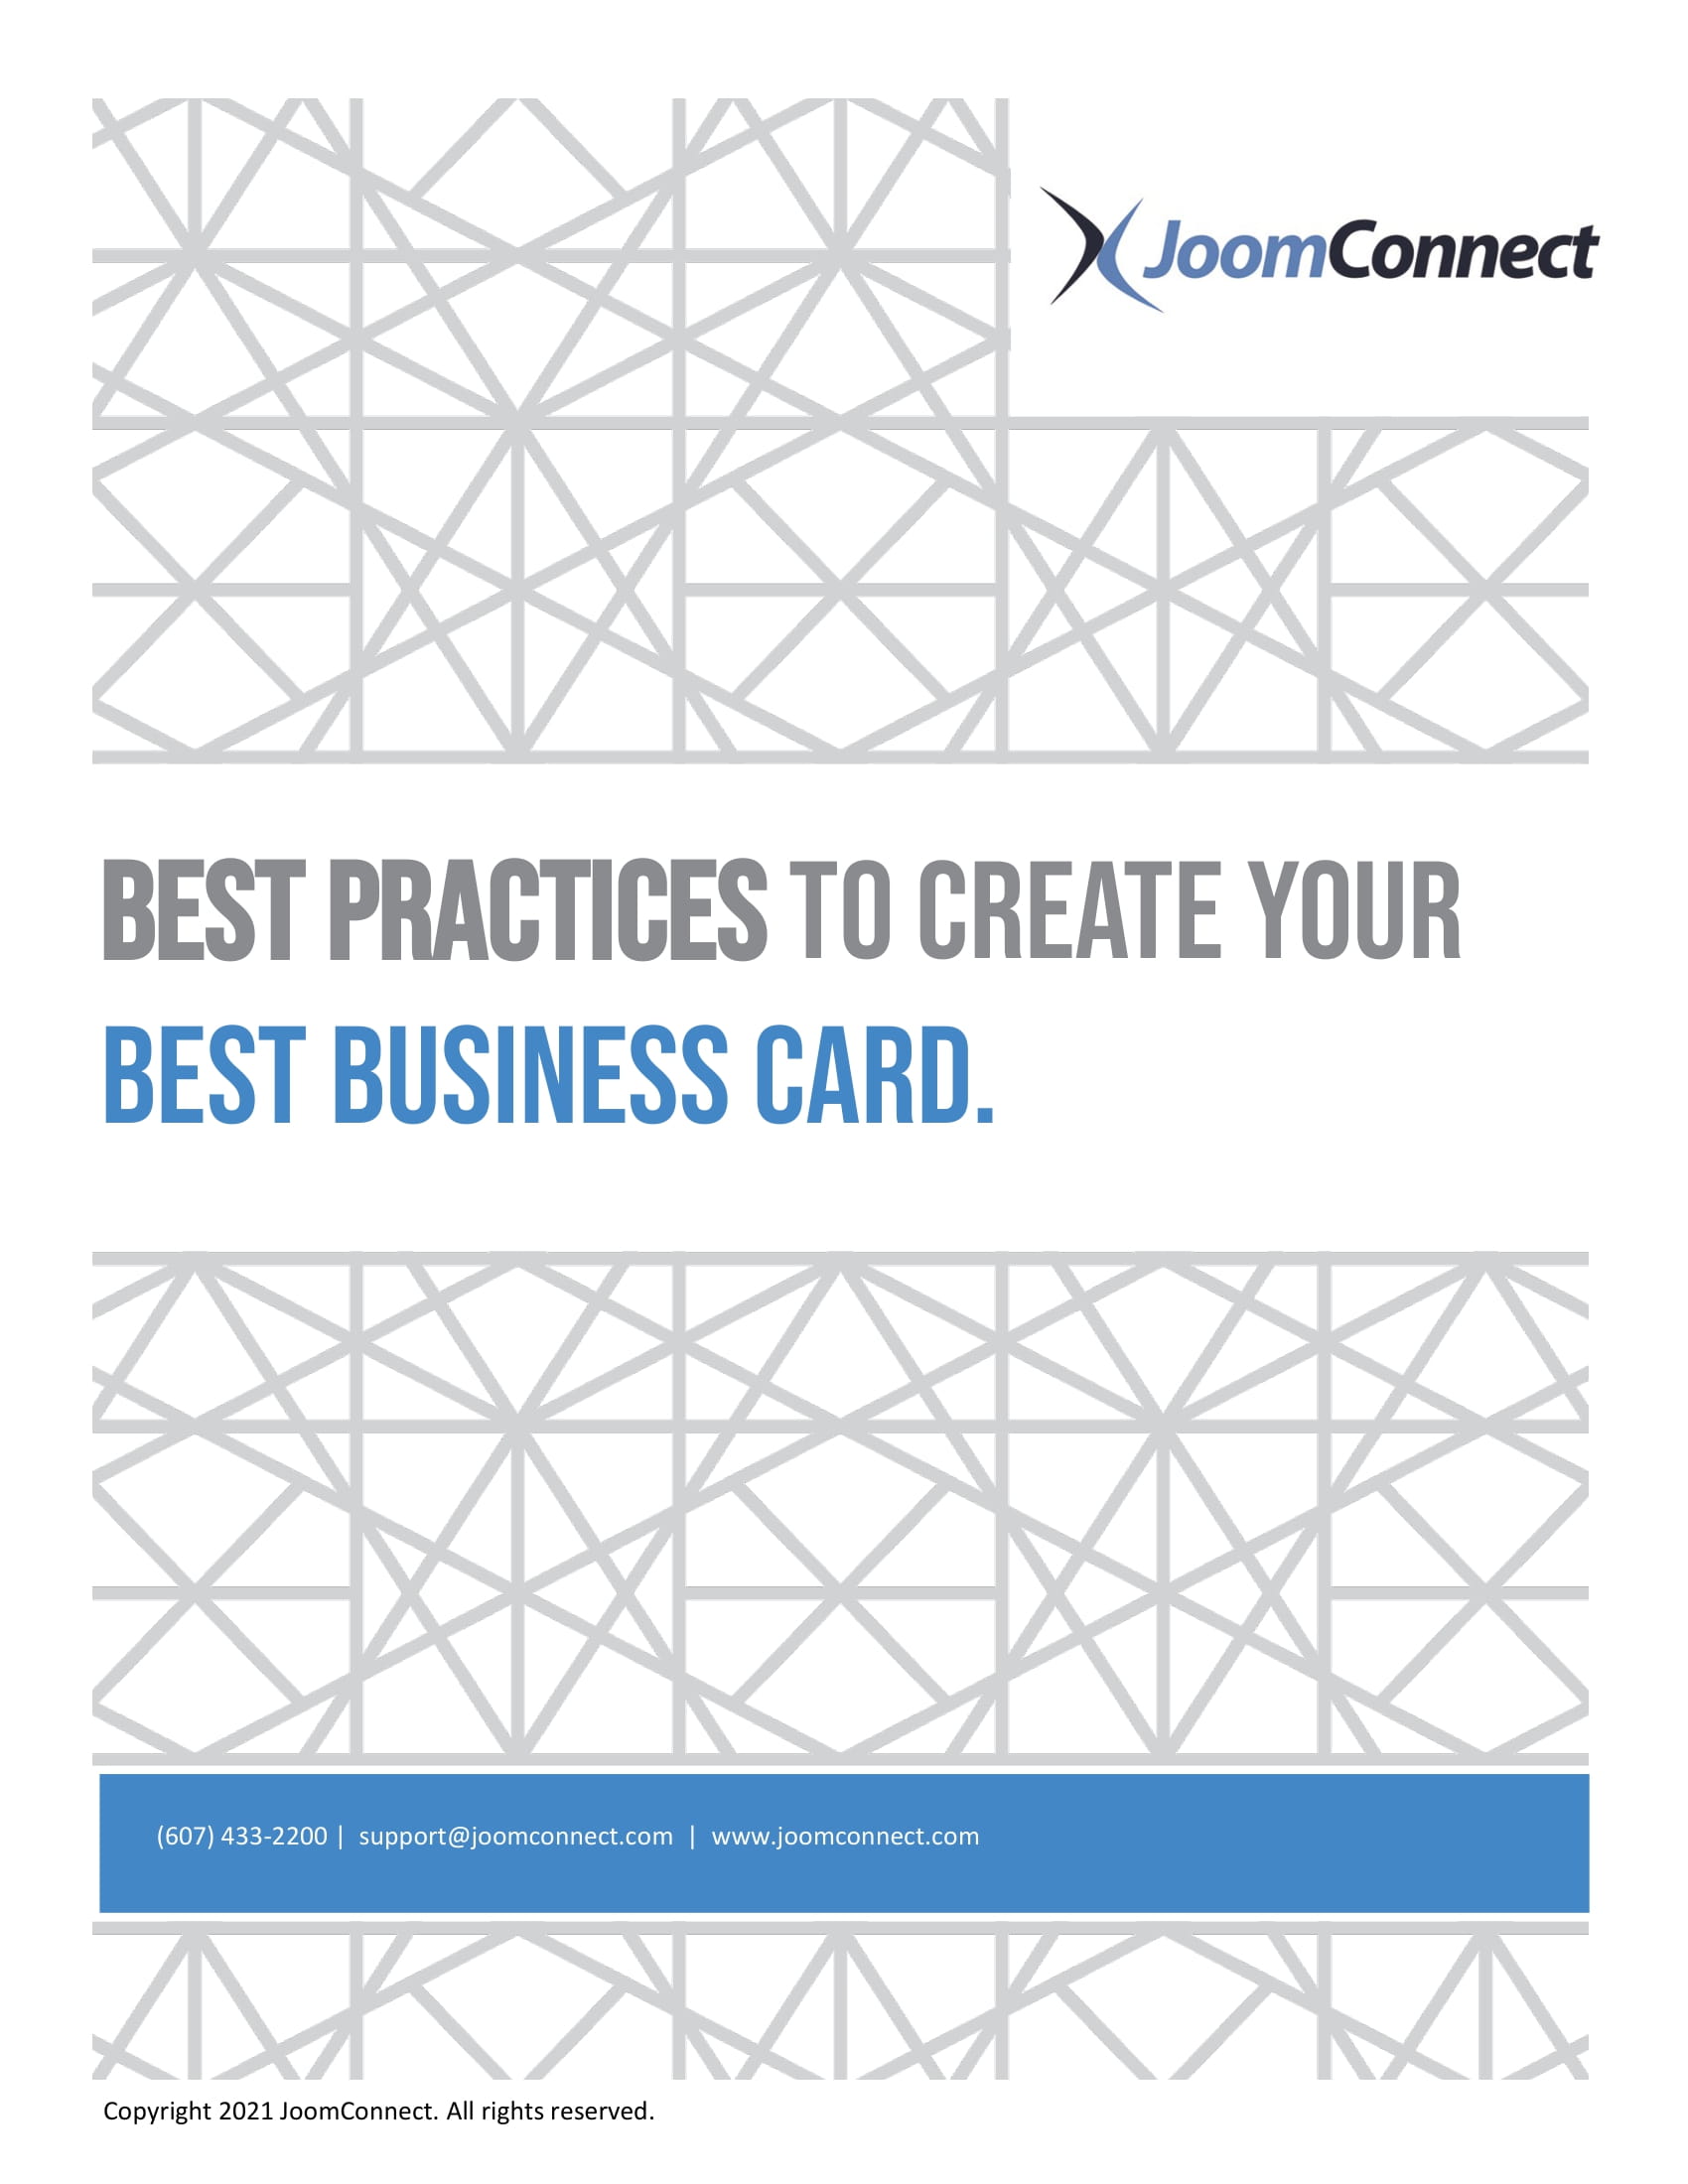 Thank You for Your Interest in Our Business Card Whitepaper!